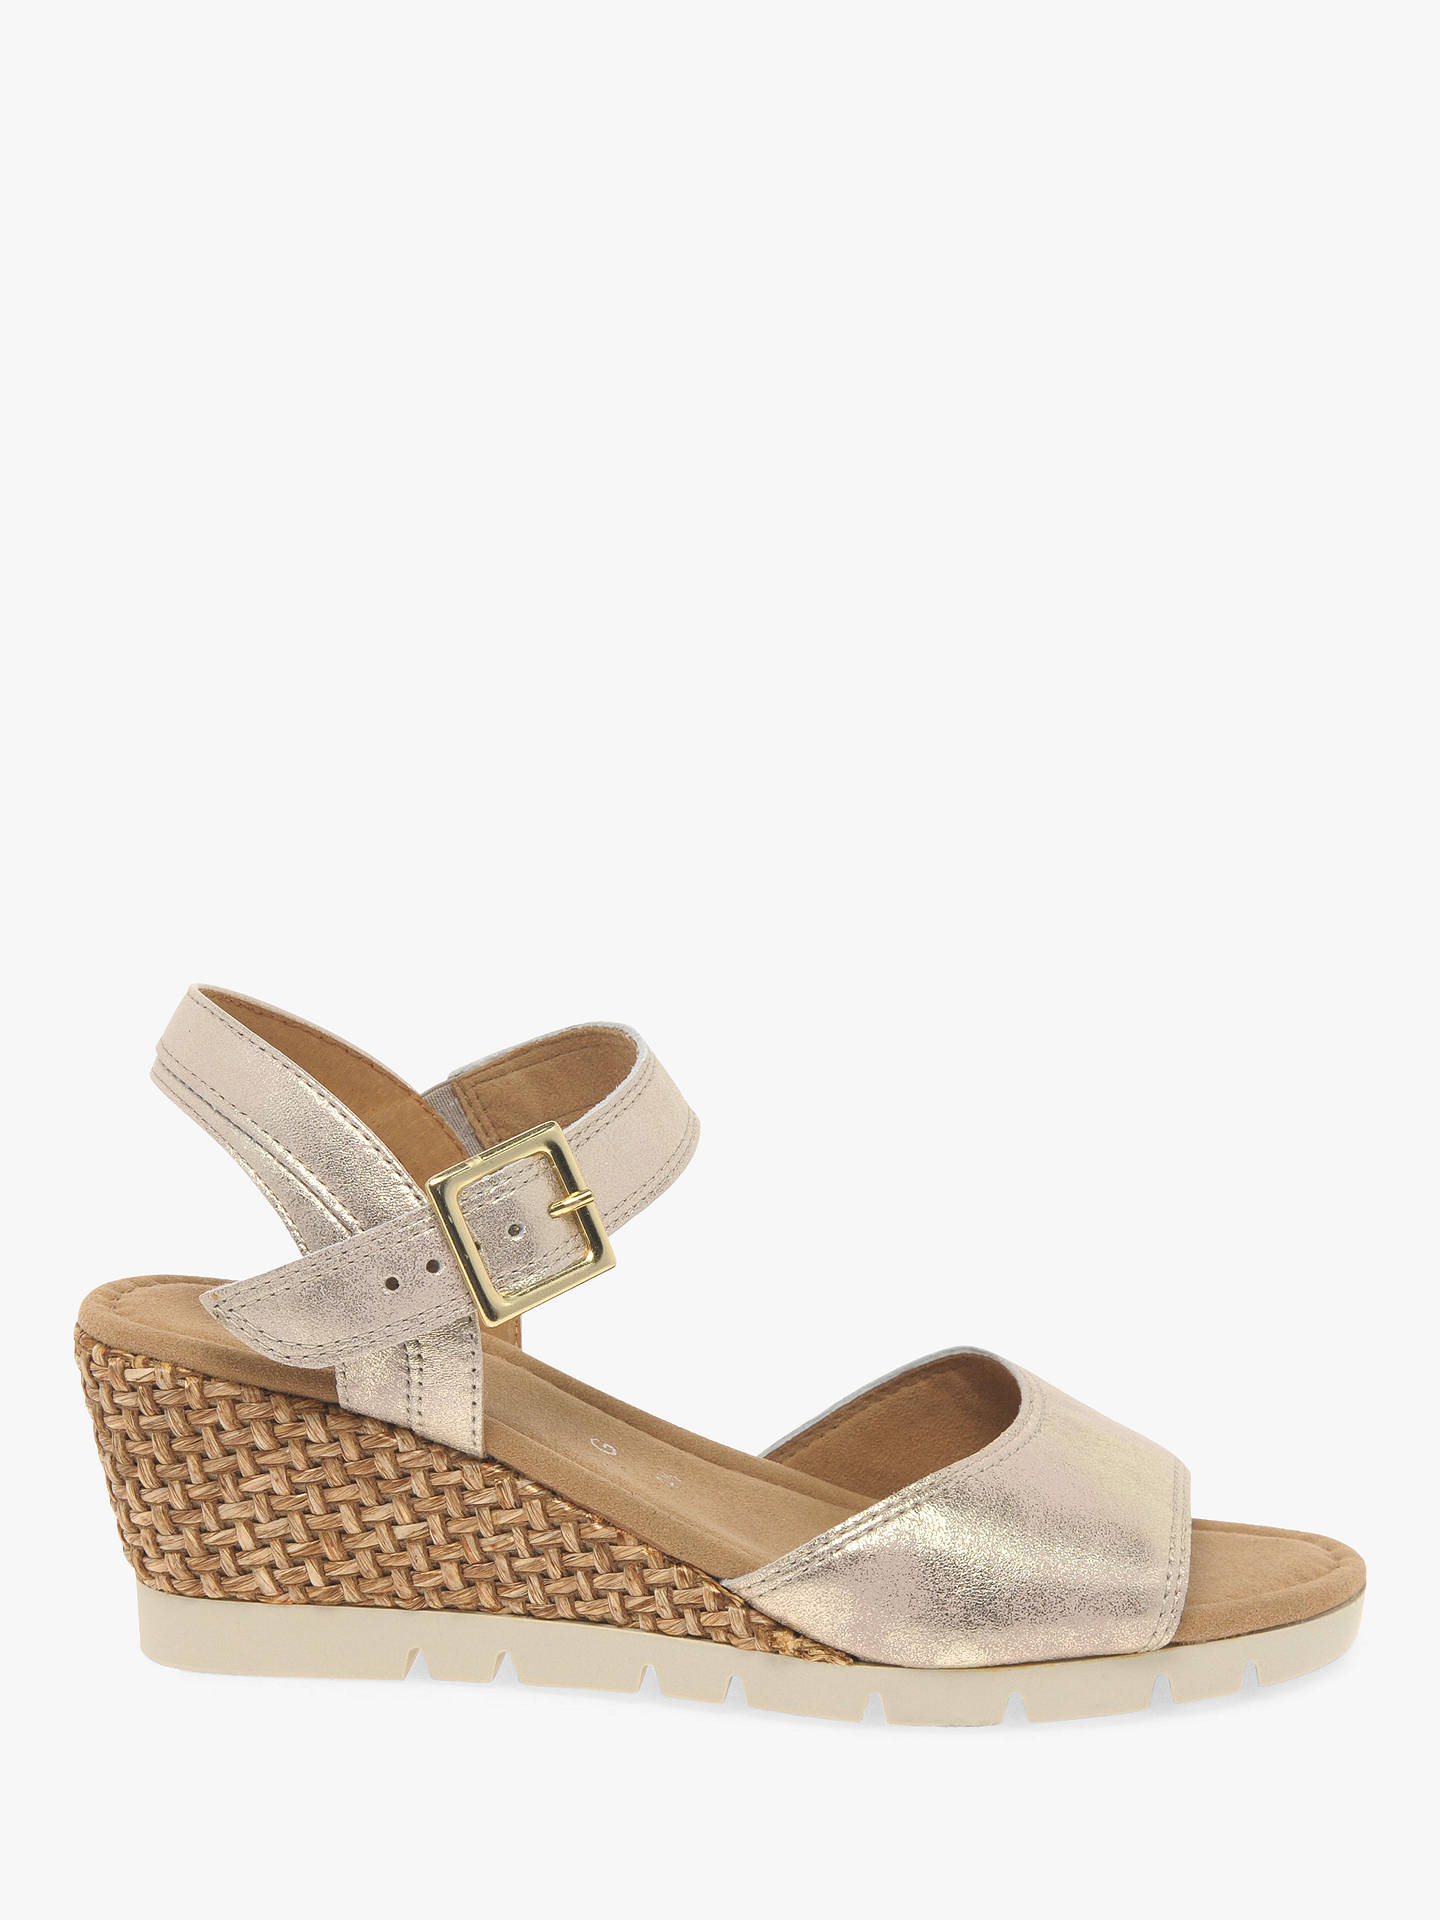 Gabor Nieve Wide Fit Wedge Heel Sandals, Gold Leather at John Lewis ...